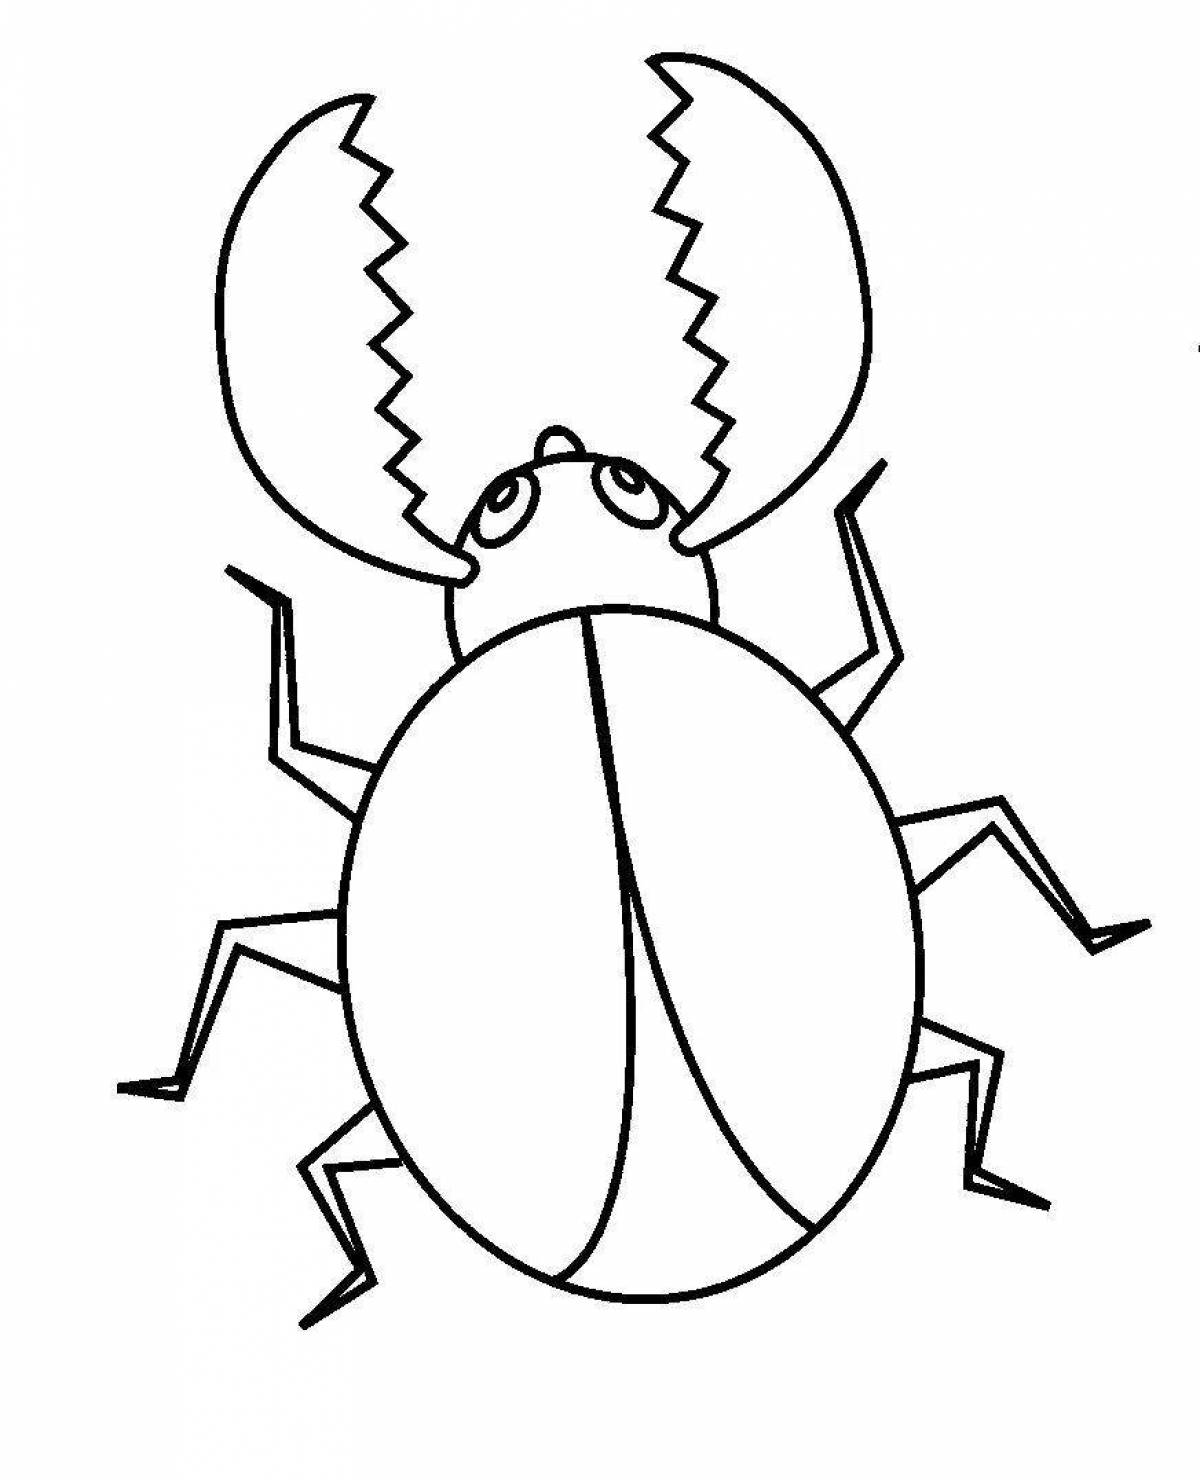 Fun beetle coloring pages